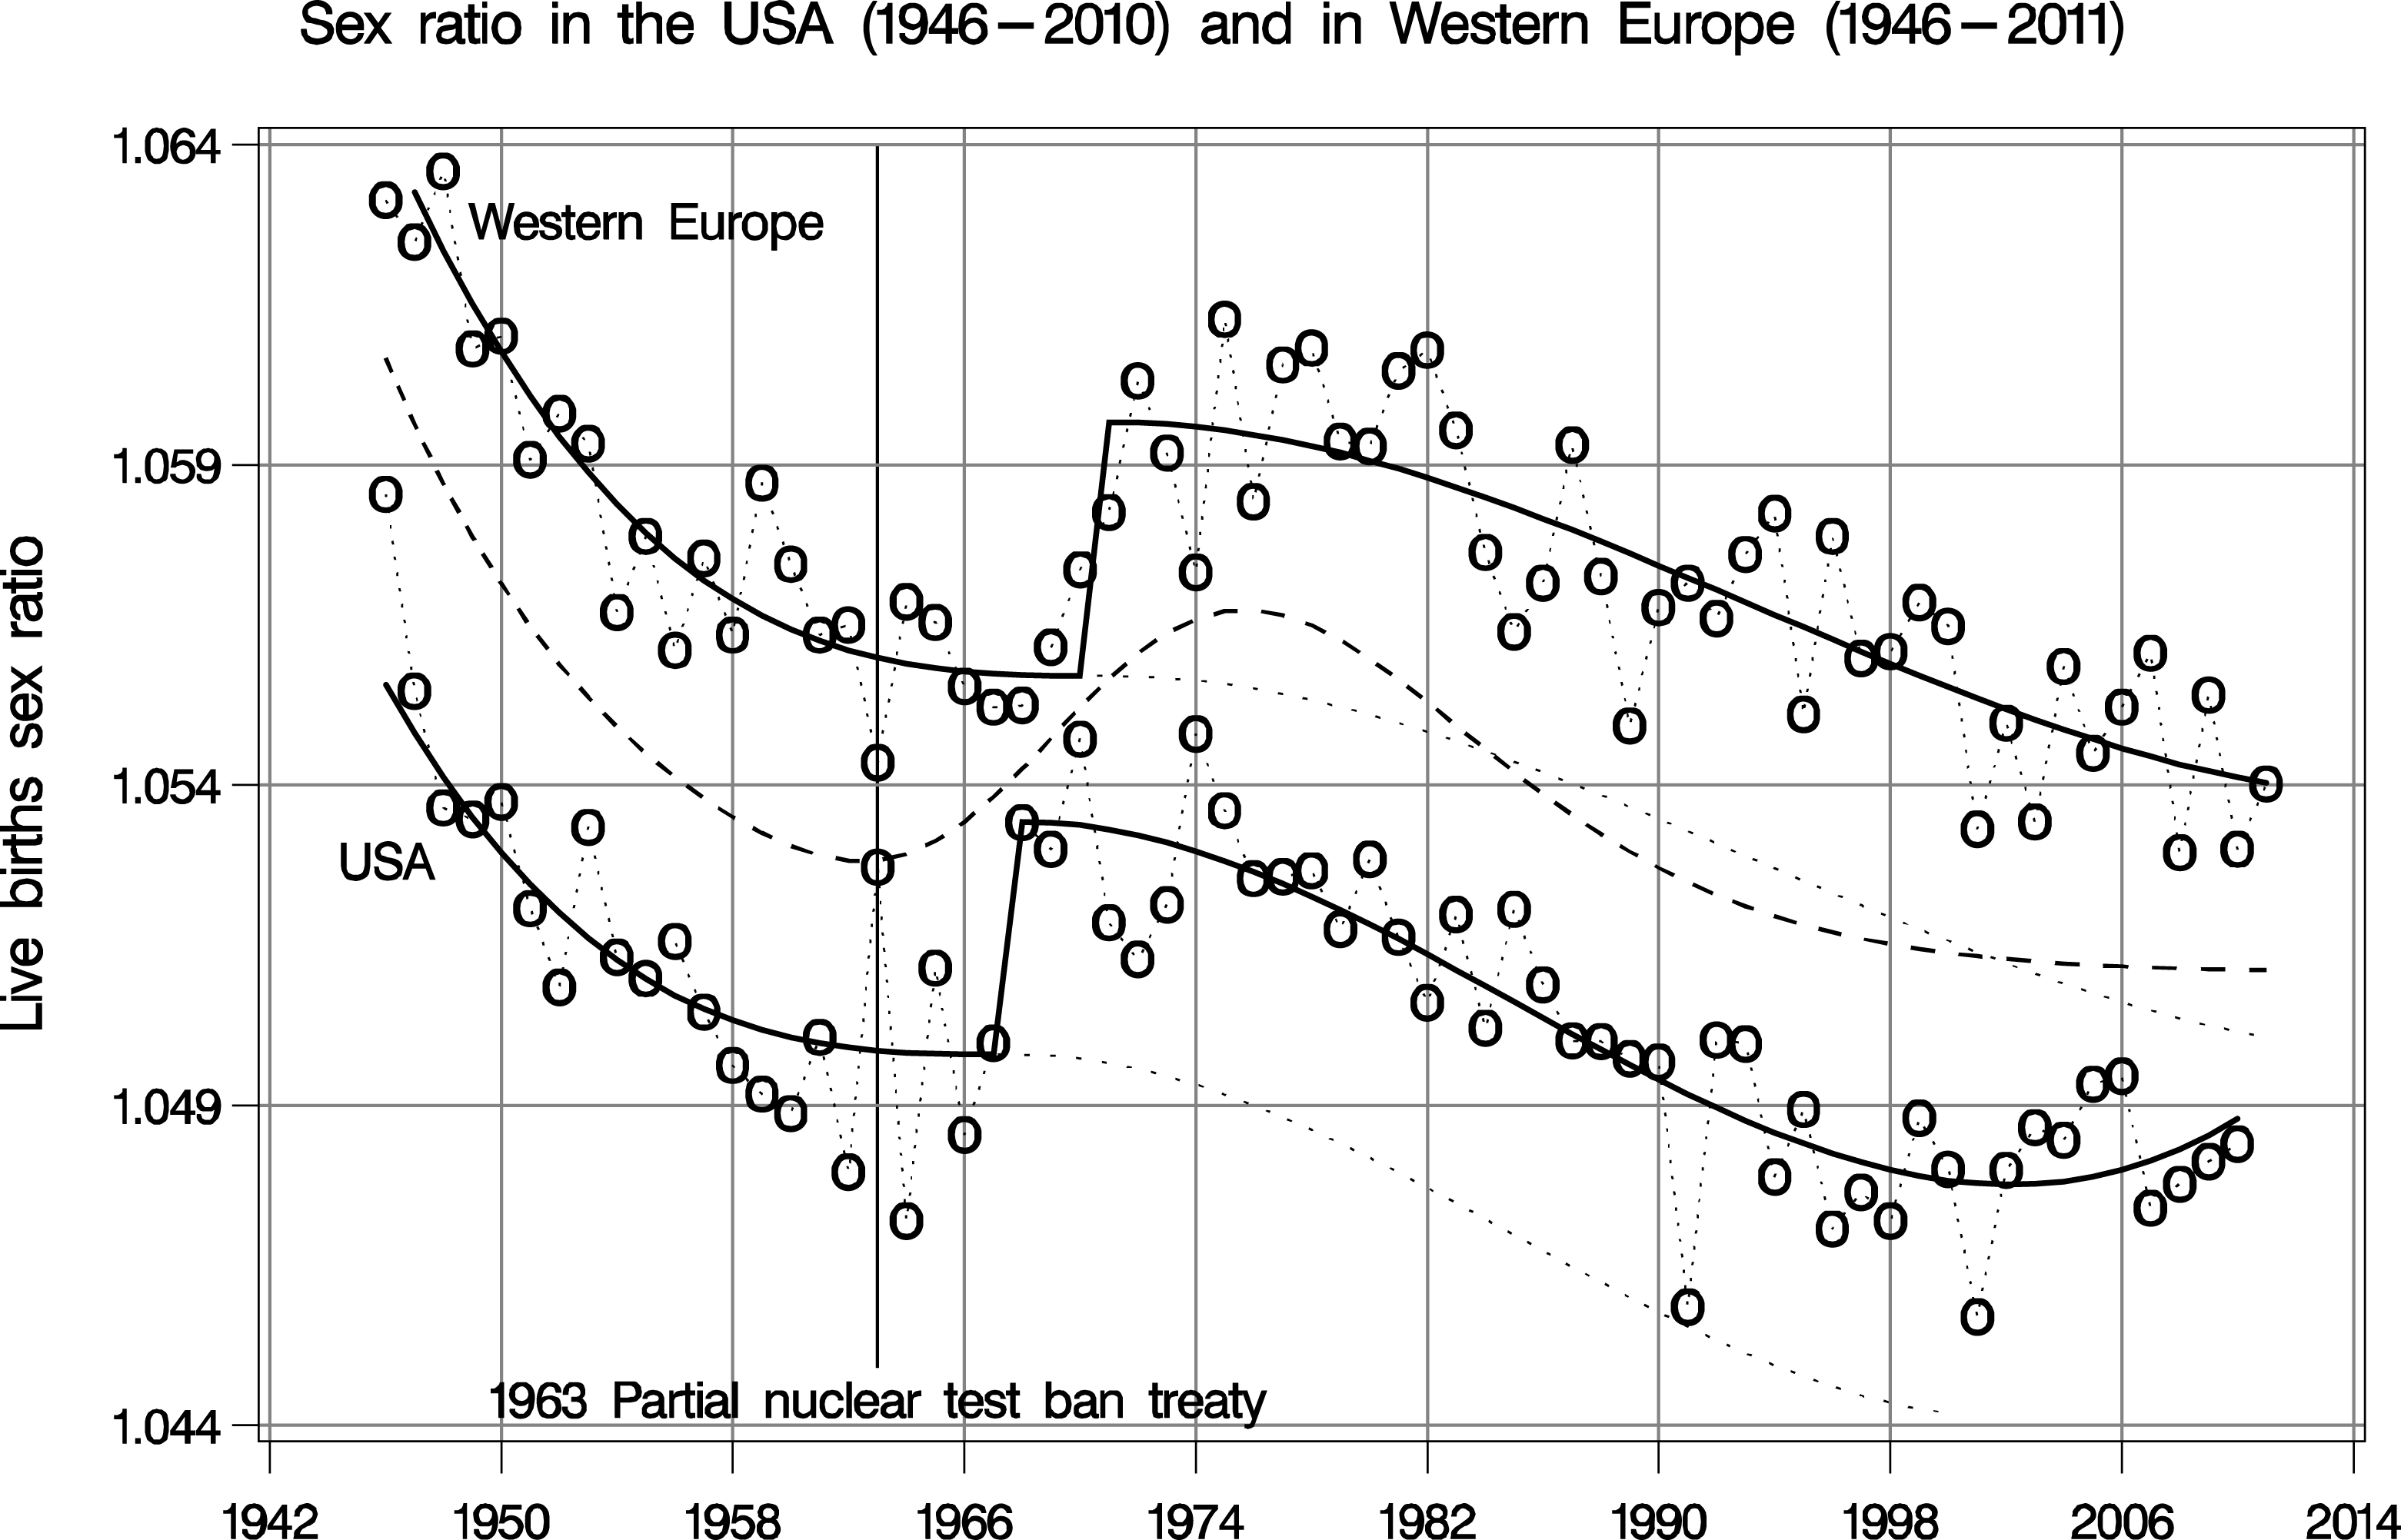 Synoptic change point trend analysis of the human secondary sex ratio in the United States of America (USA) and in Western Europe (Germany, France, Italy, Spain, and United Kingdom); optimum change point (jumps) in the USA in 1968 (sex odds ratio 1.0036, 95% -CI: 1.0027–1.0044) and in Western Europe 1971 (sex odds ratio 1.0039, 95% -CI: 1.0029–1.0048); the bold broken line is the double exponential/lognormal model by Körblein.